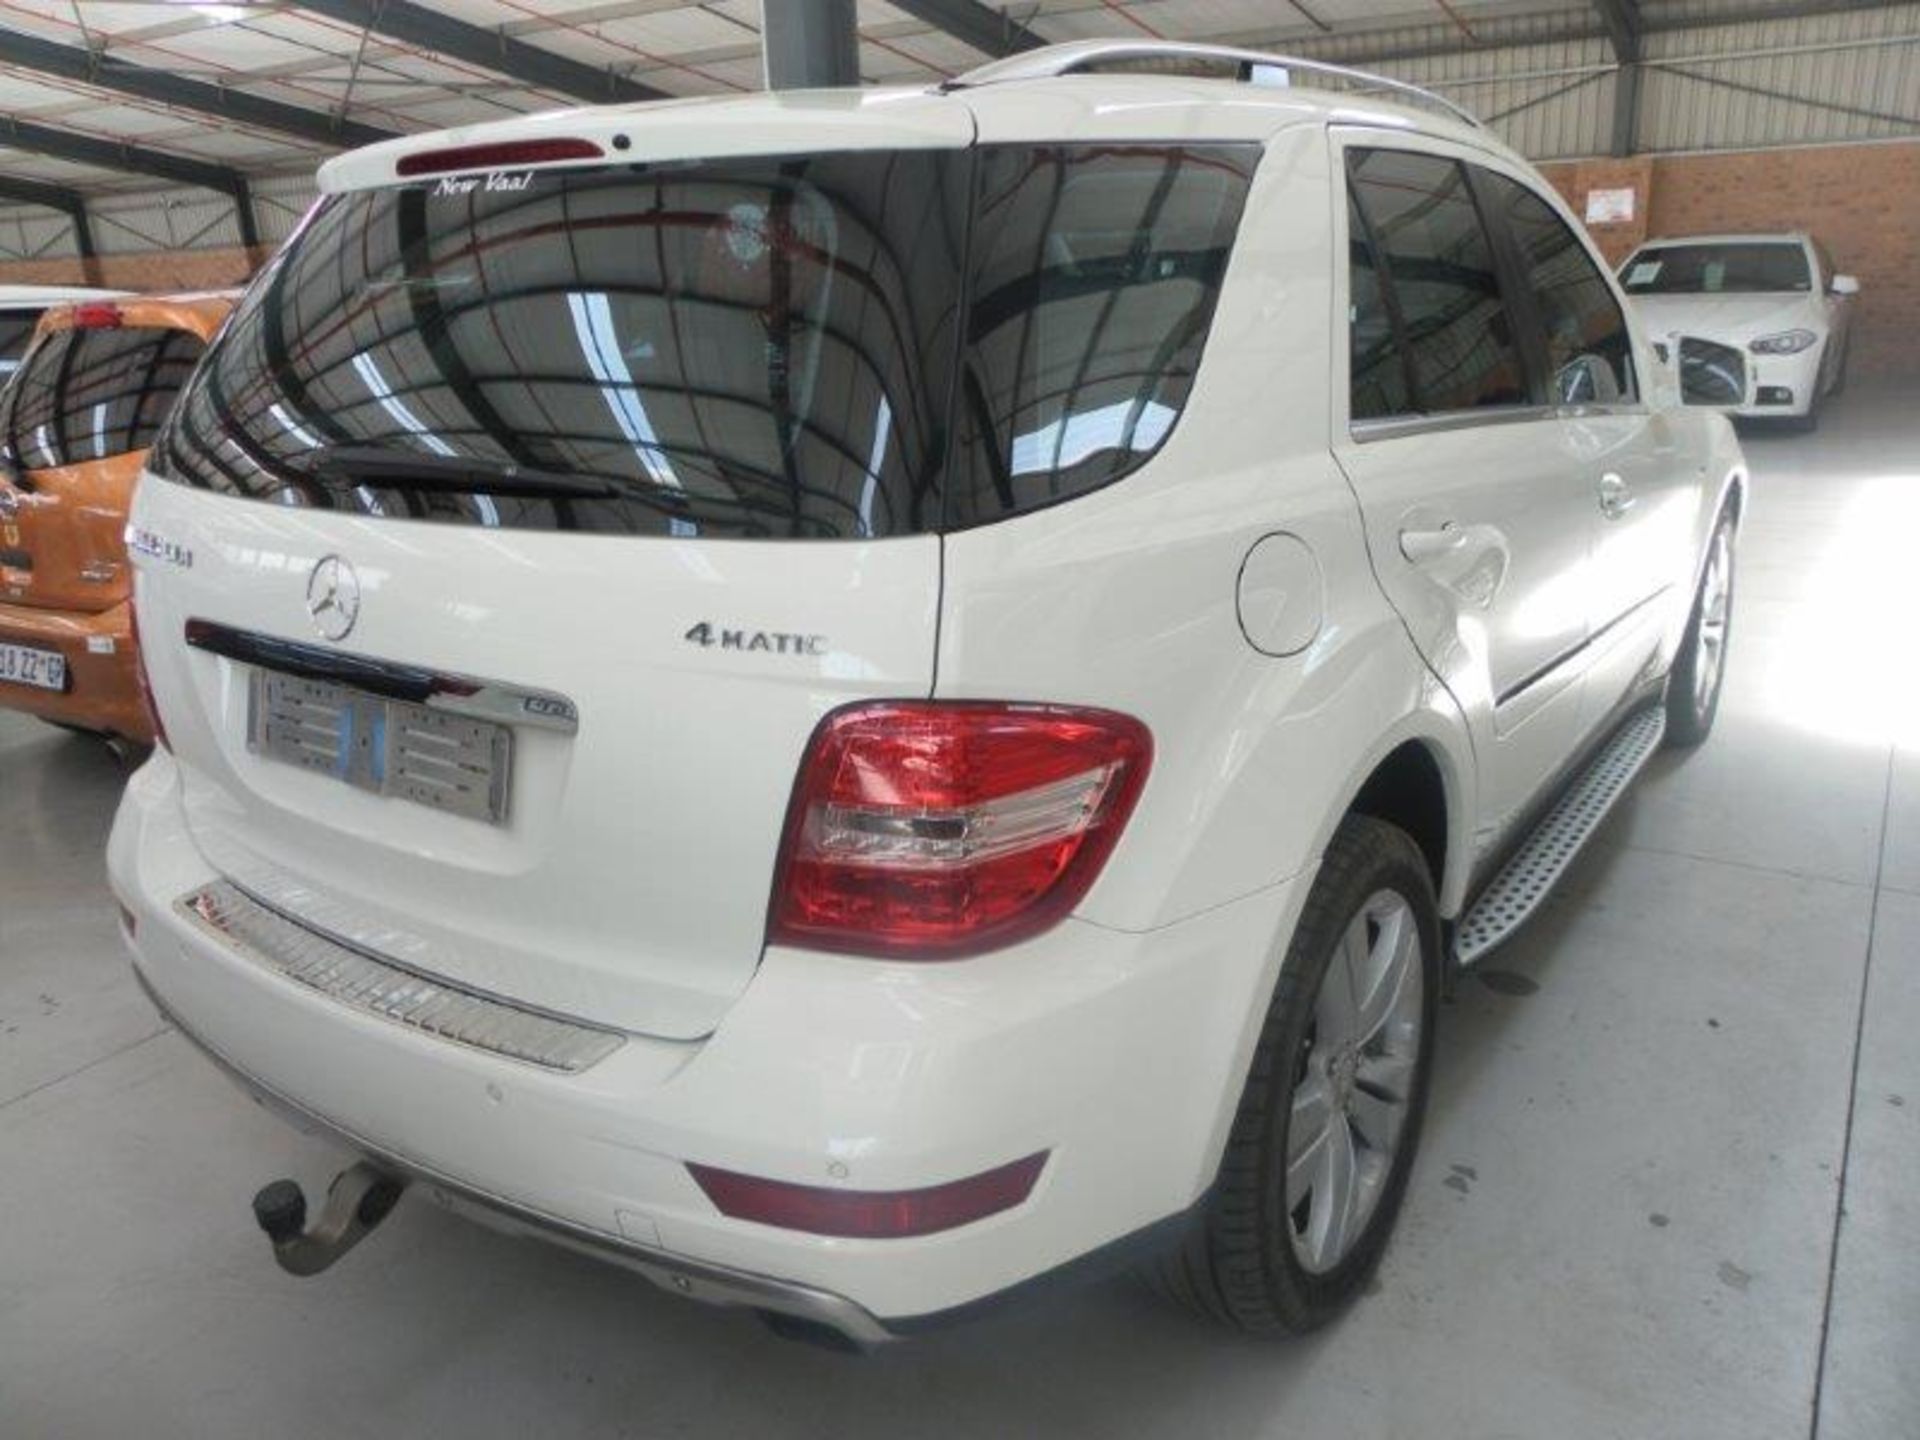 2011 MADOSINFS Mercedes-Benz ML350 CDI 4Matic (Vin No: WDC1641222A656827 )(50023 kms) Suggested - Image 3 of 5